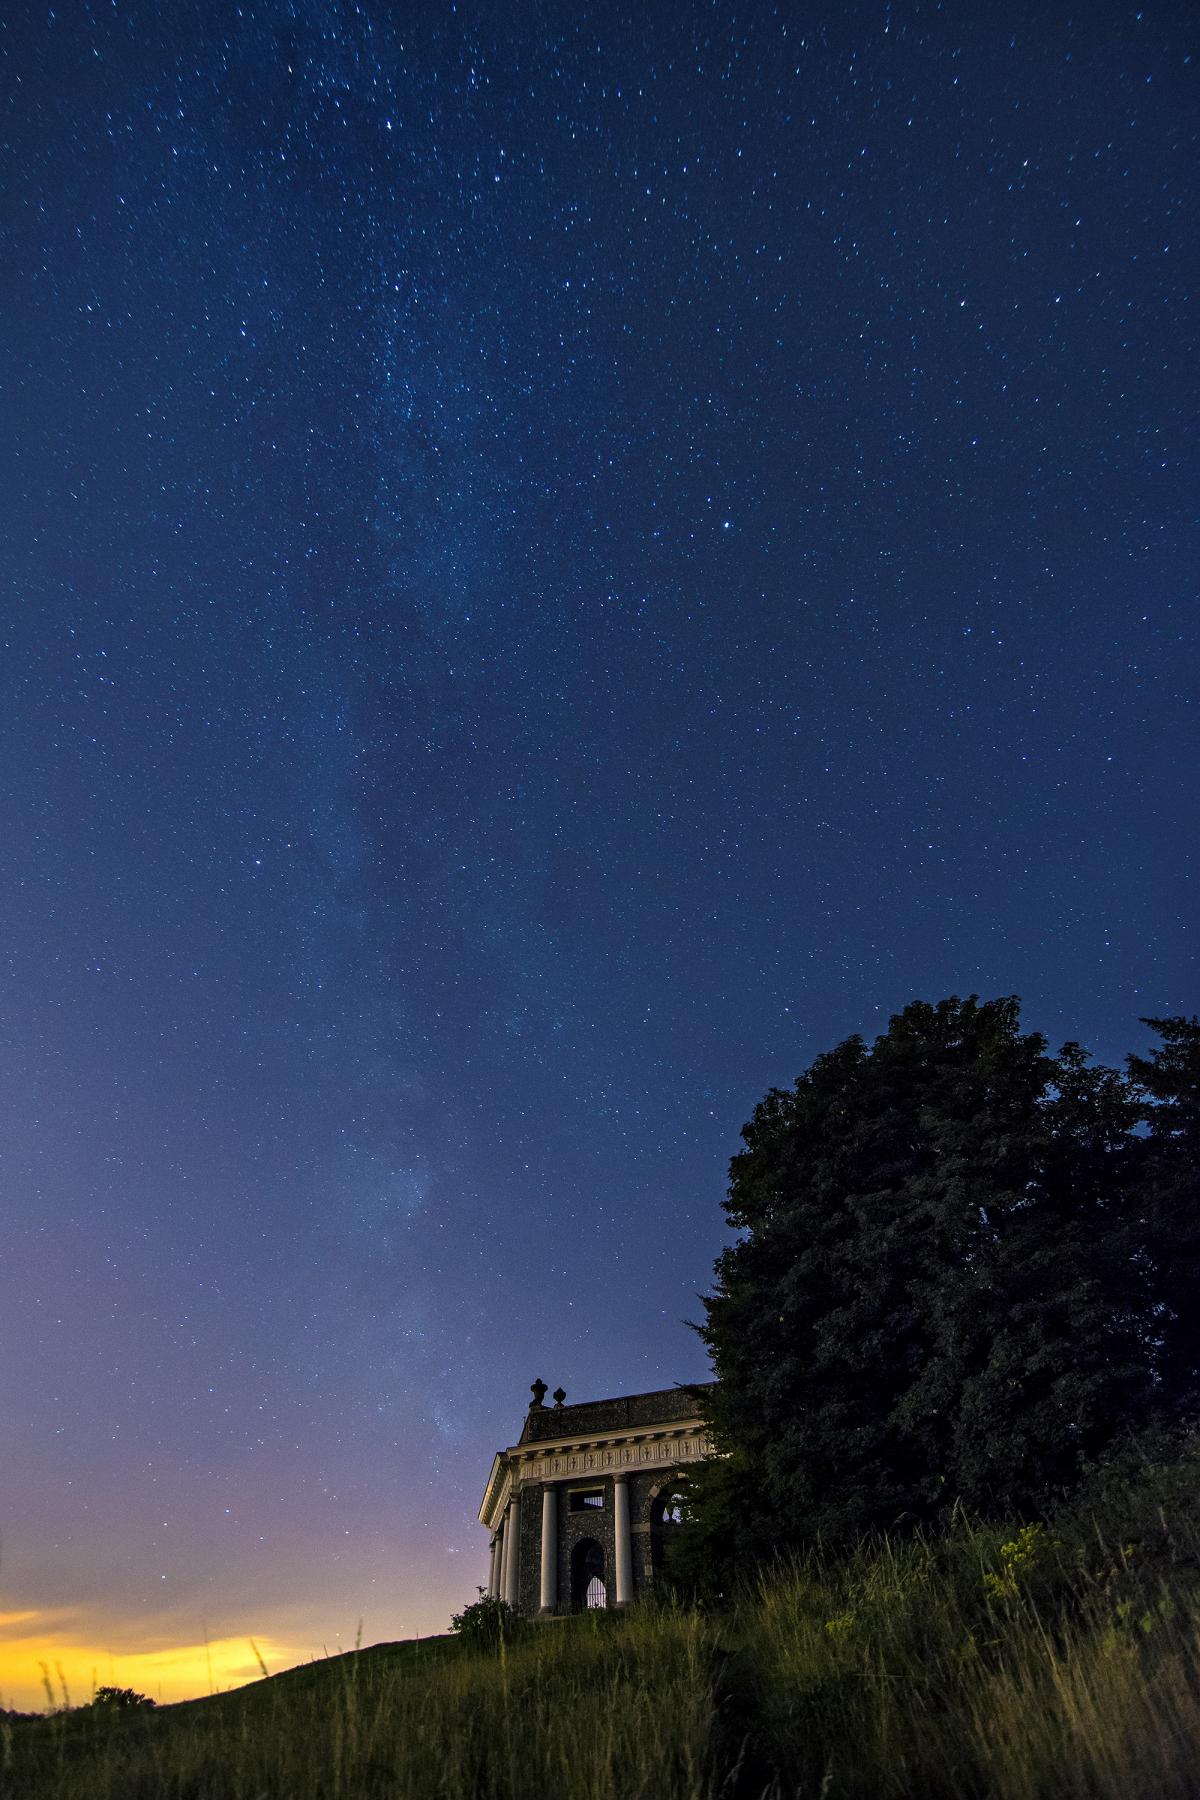 Michael P Sannwald from High Wycombe - The Milky Way as seen from the Dashwood Mausoleum in West Wycombe